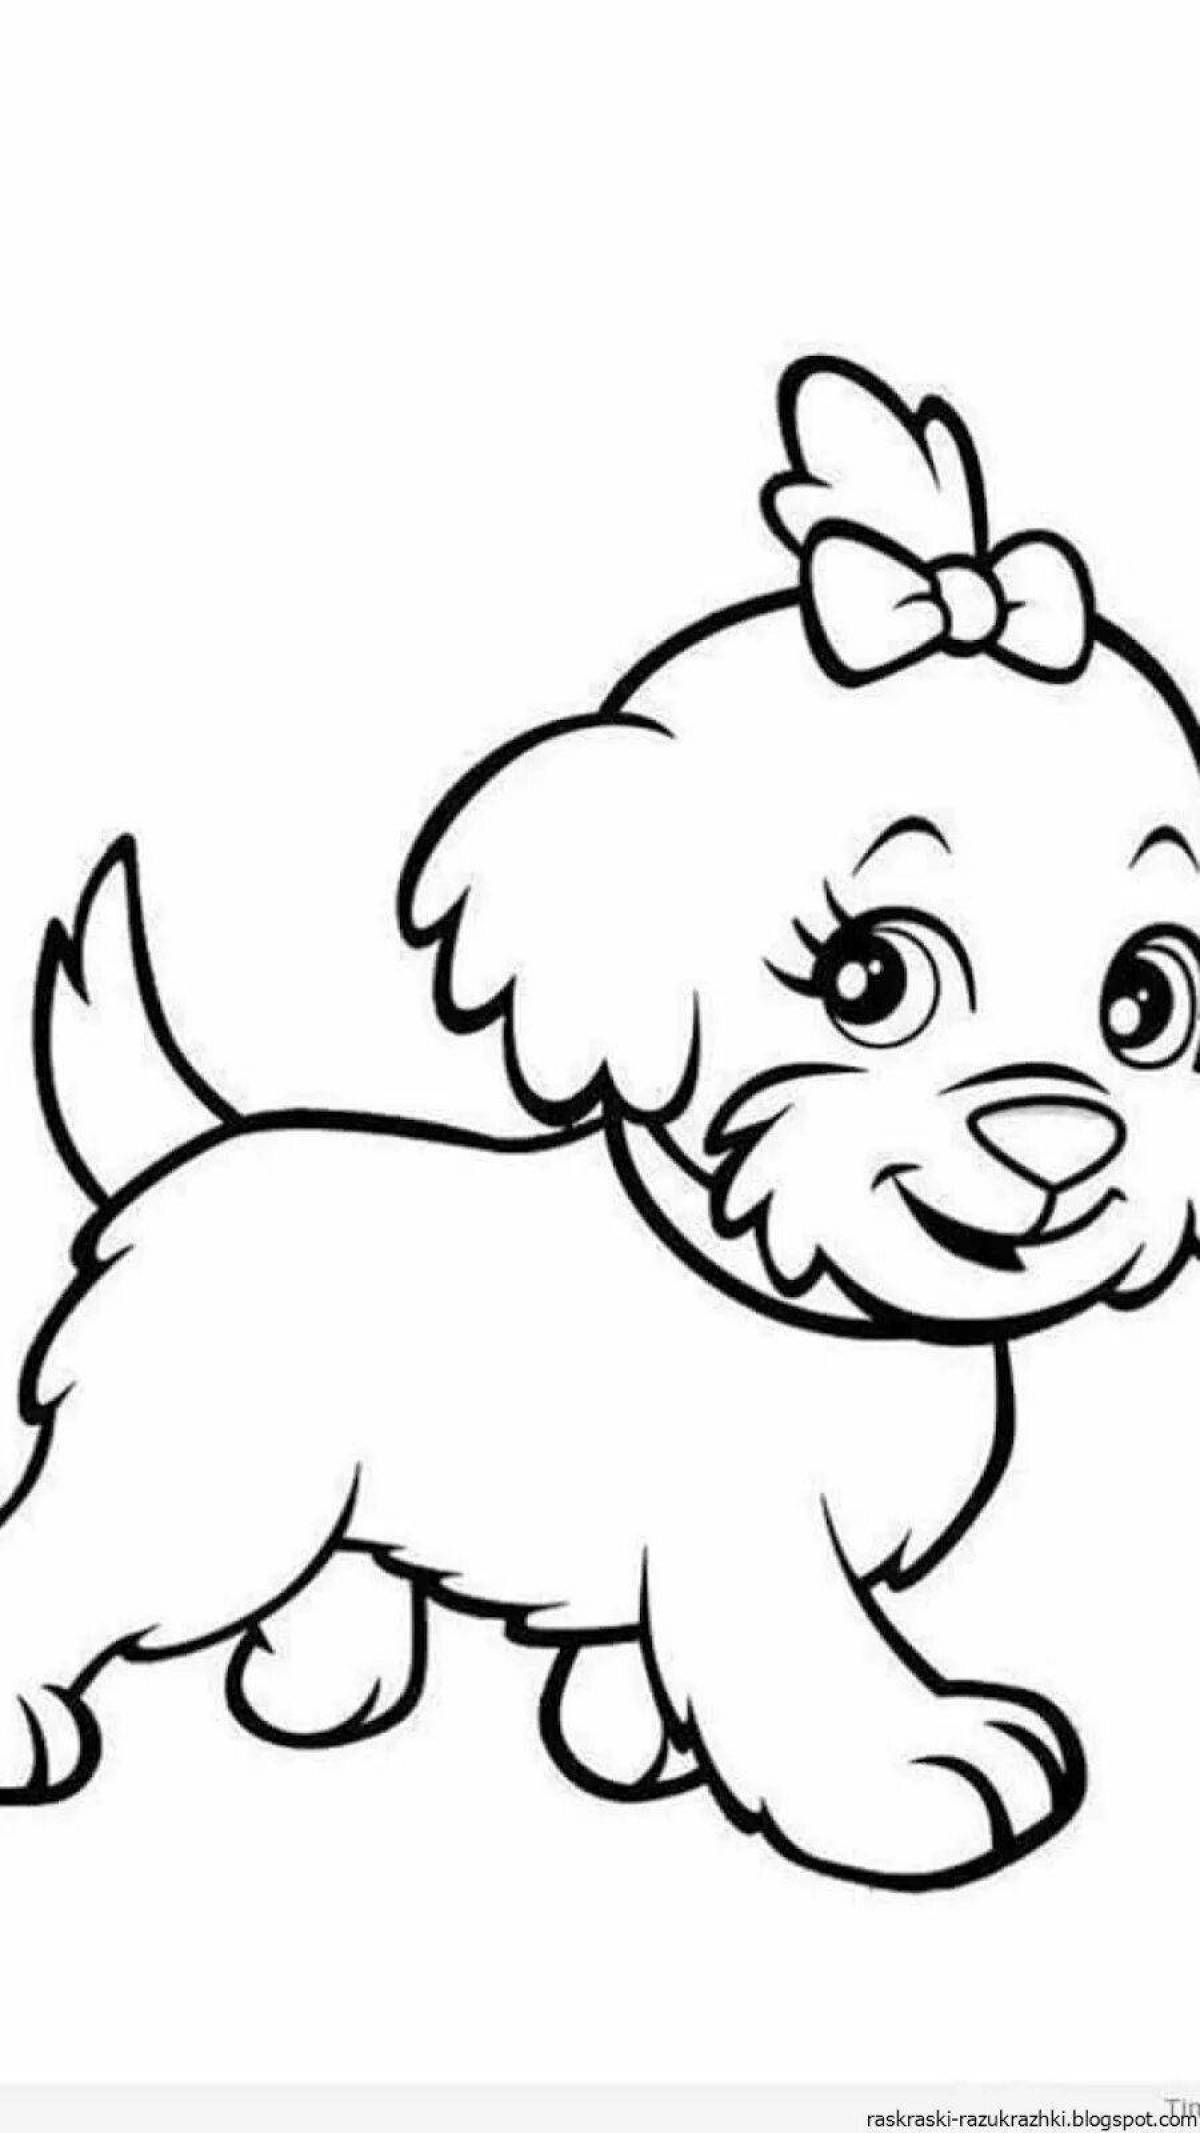 Coloring page playful puppy